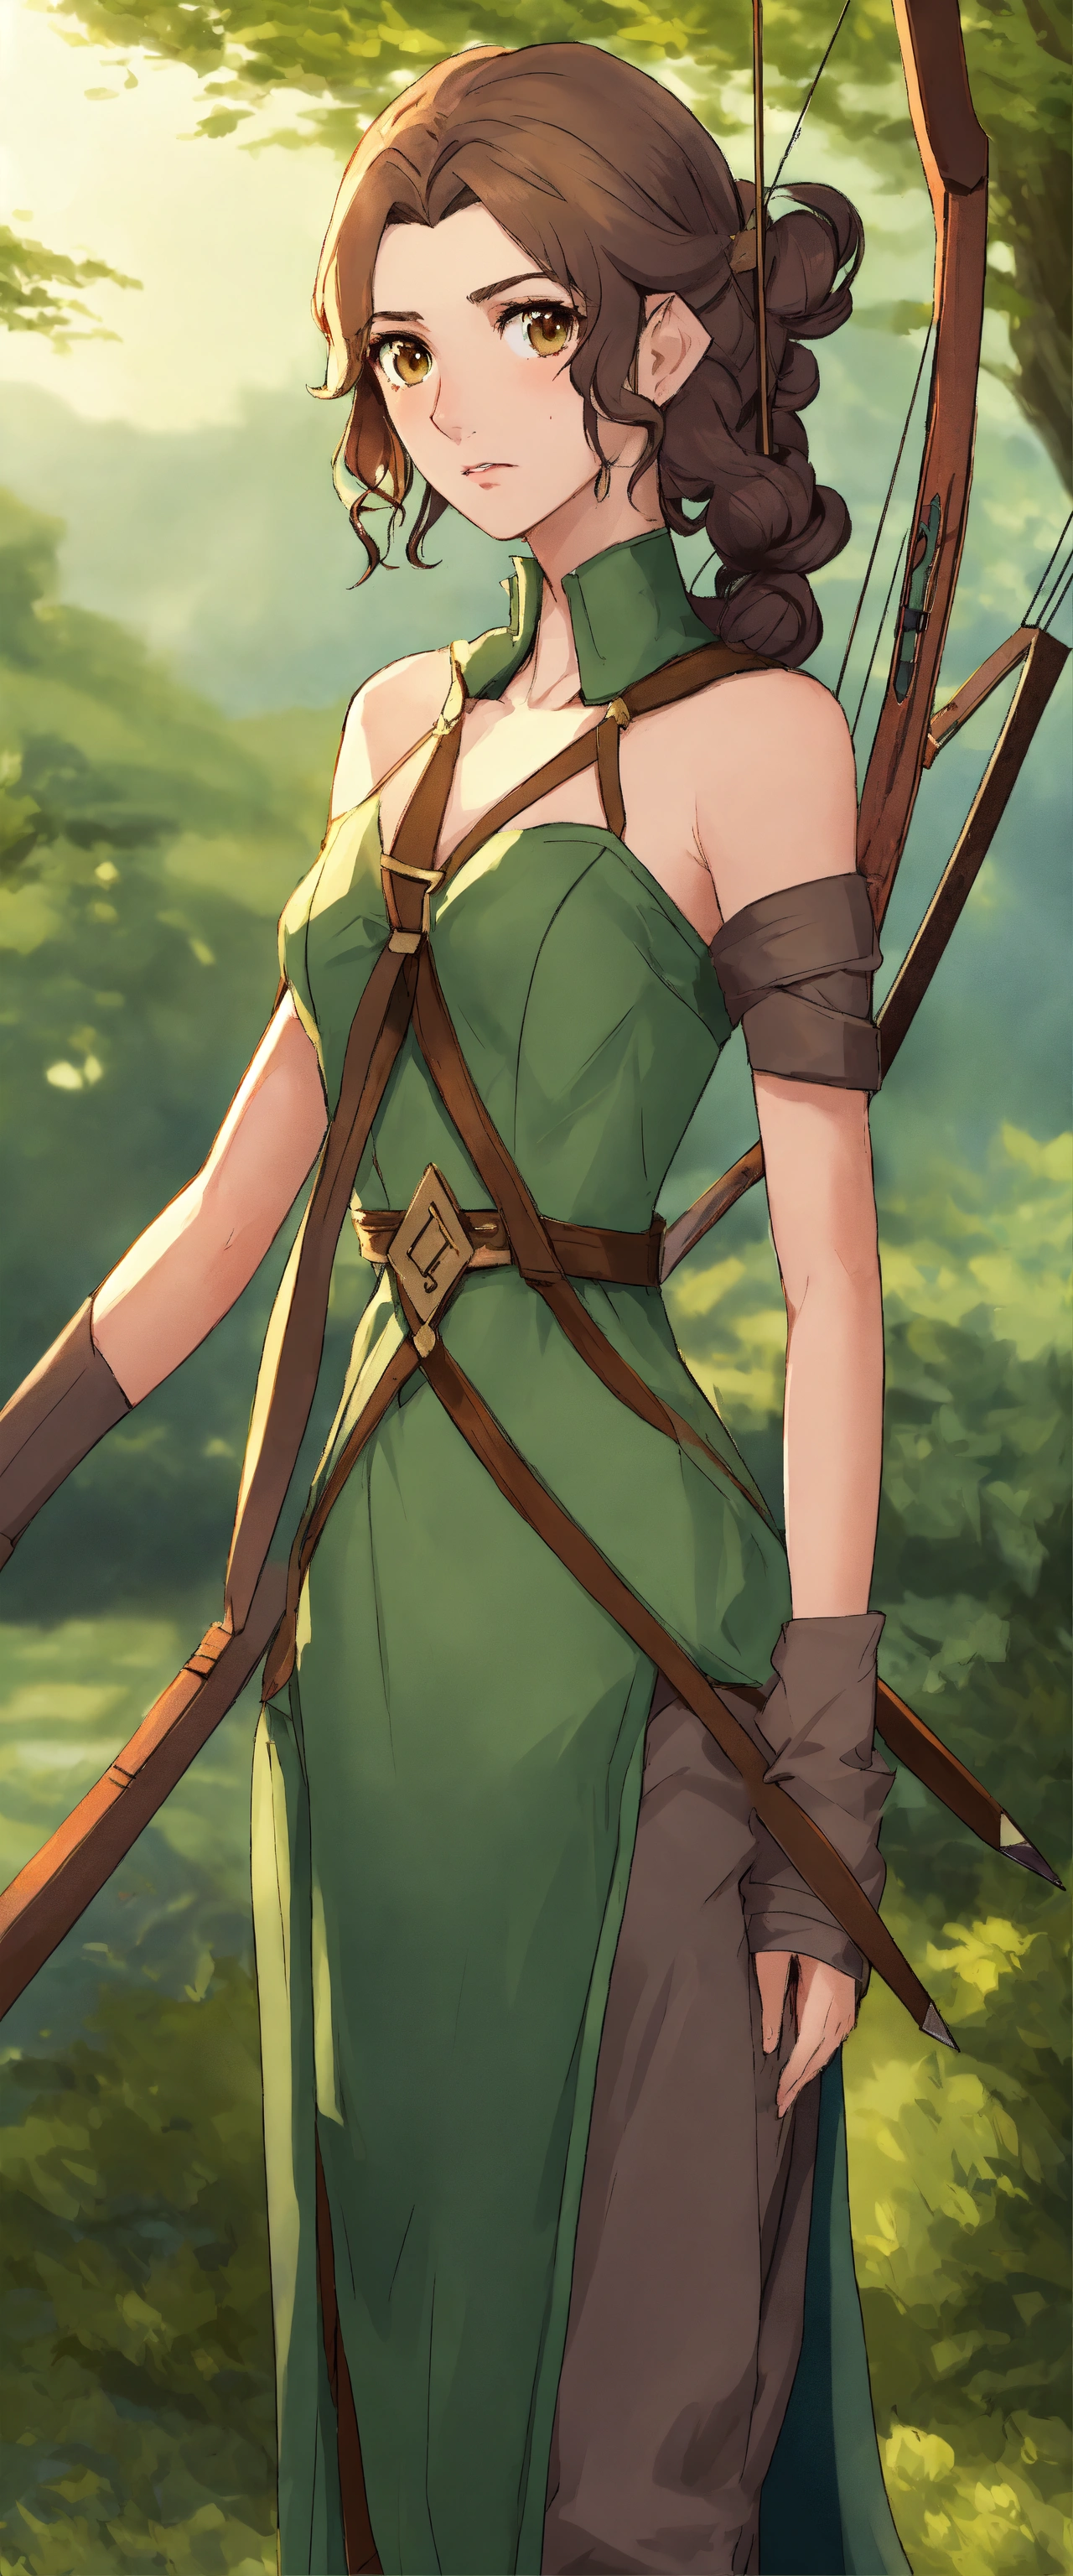 Lexica - Anime, character art of a 24-year-old female wood elf, curly ...